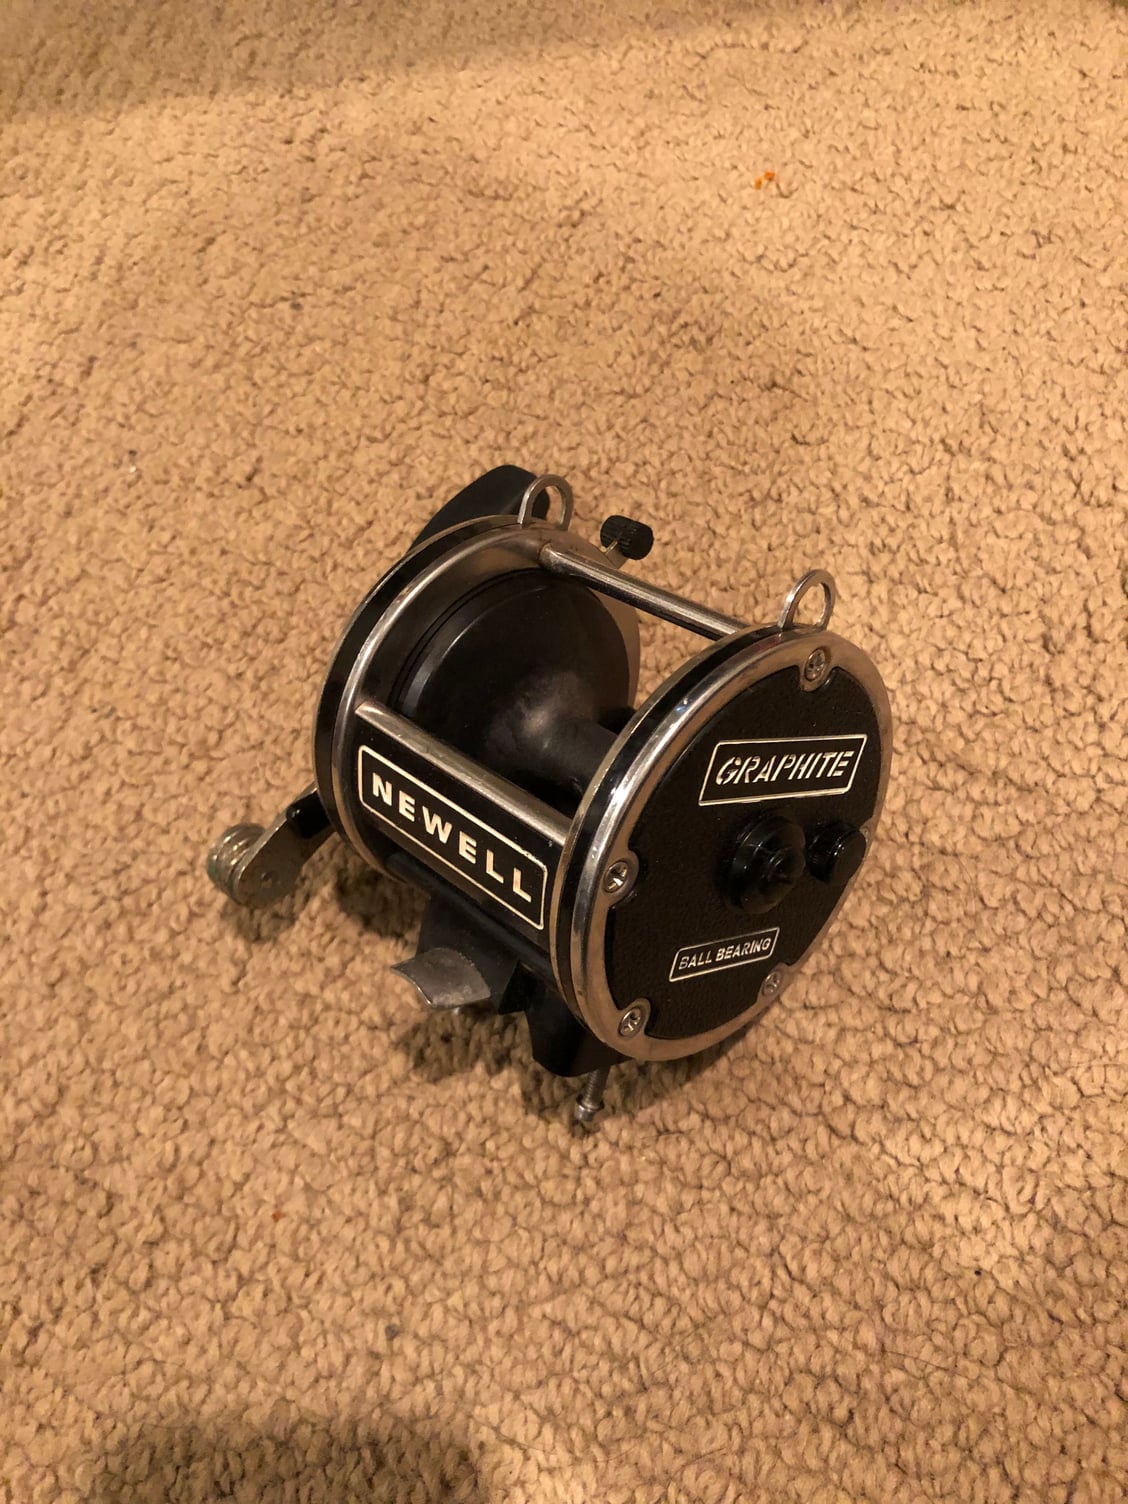 Fishing Reel Cleanout - The Hull Truth - Boating and Fishing Forum